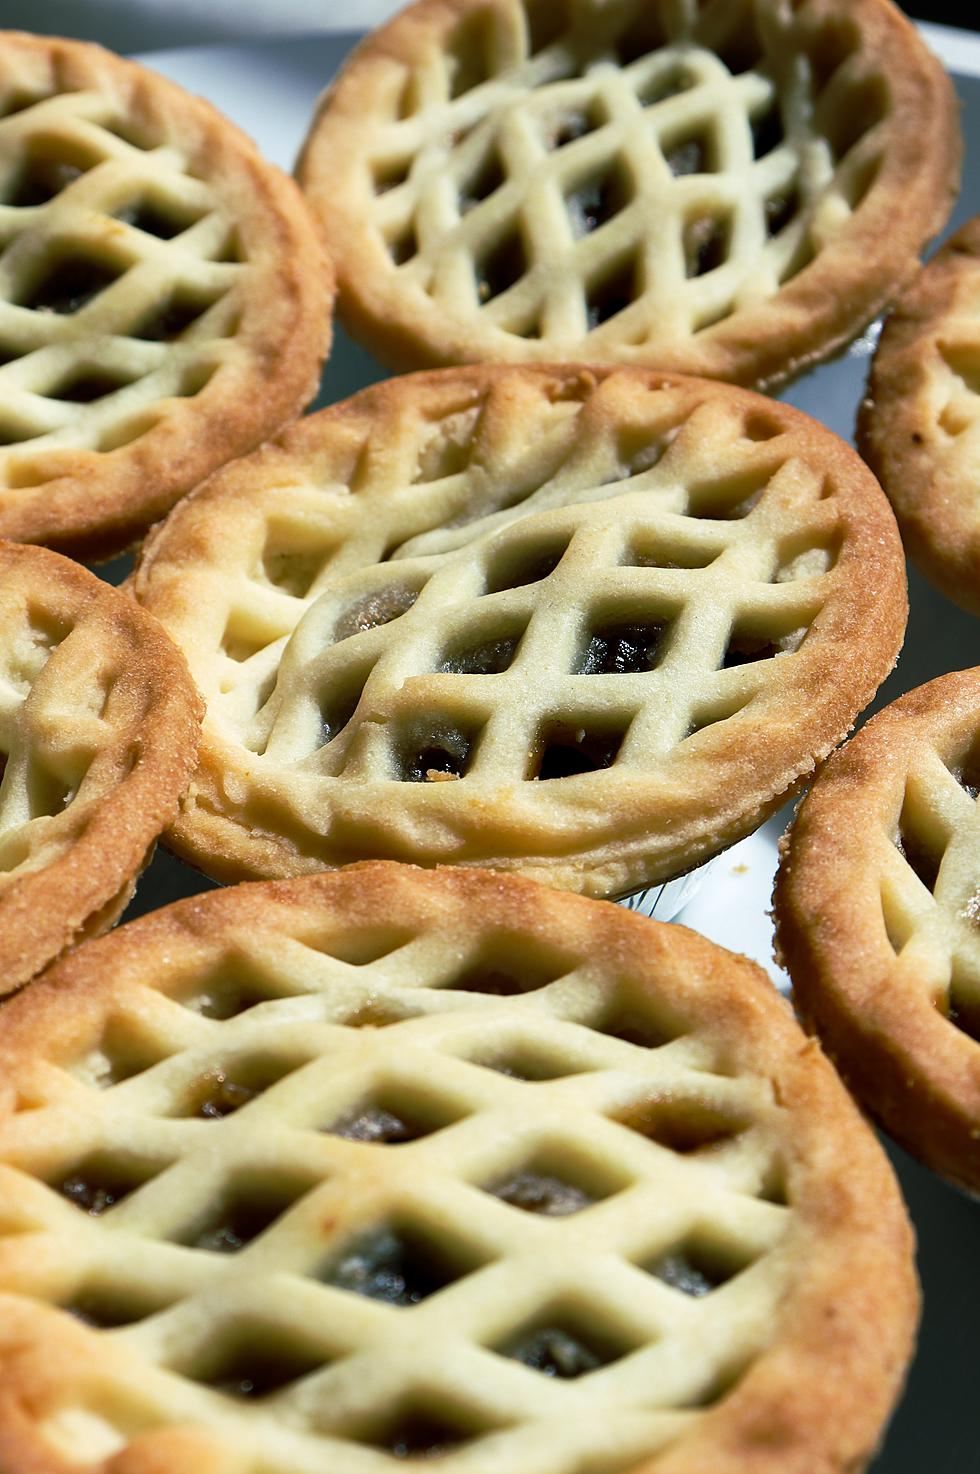 Top 25 Spots That Make Delicious Holiday Pies In Monmouth & Ocean County, NJ